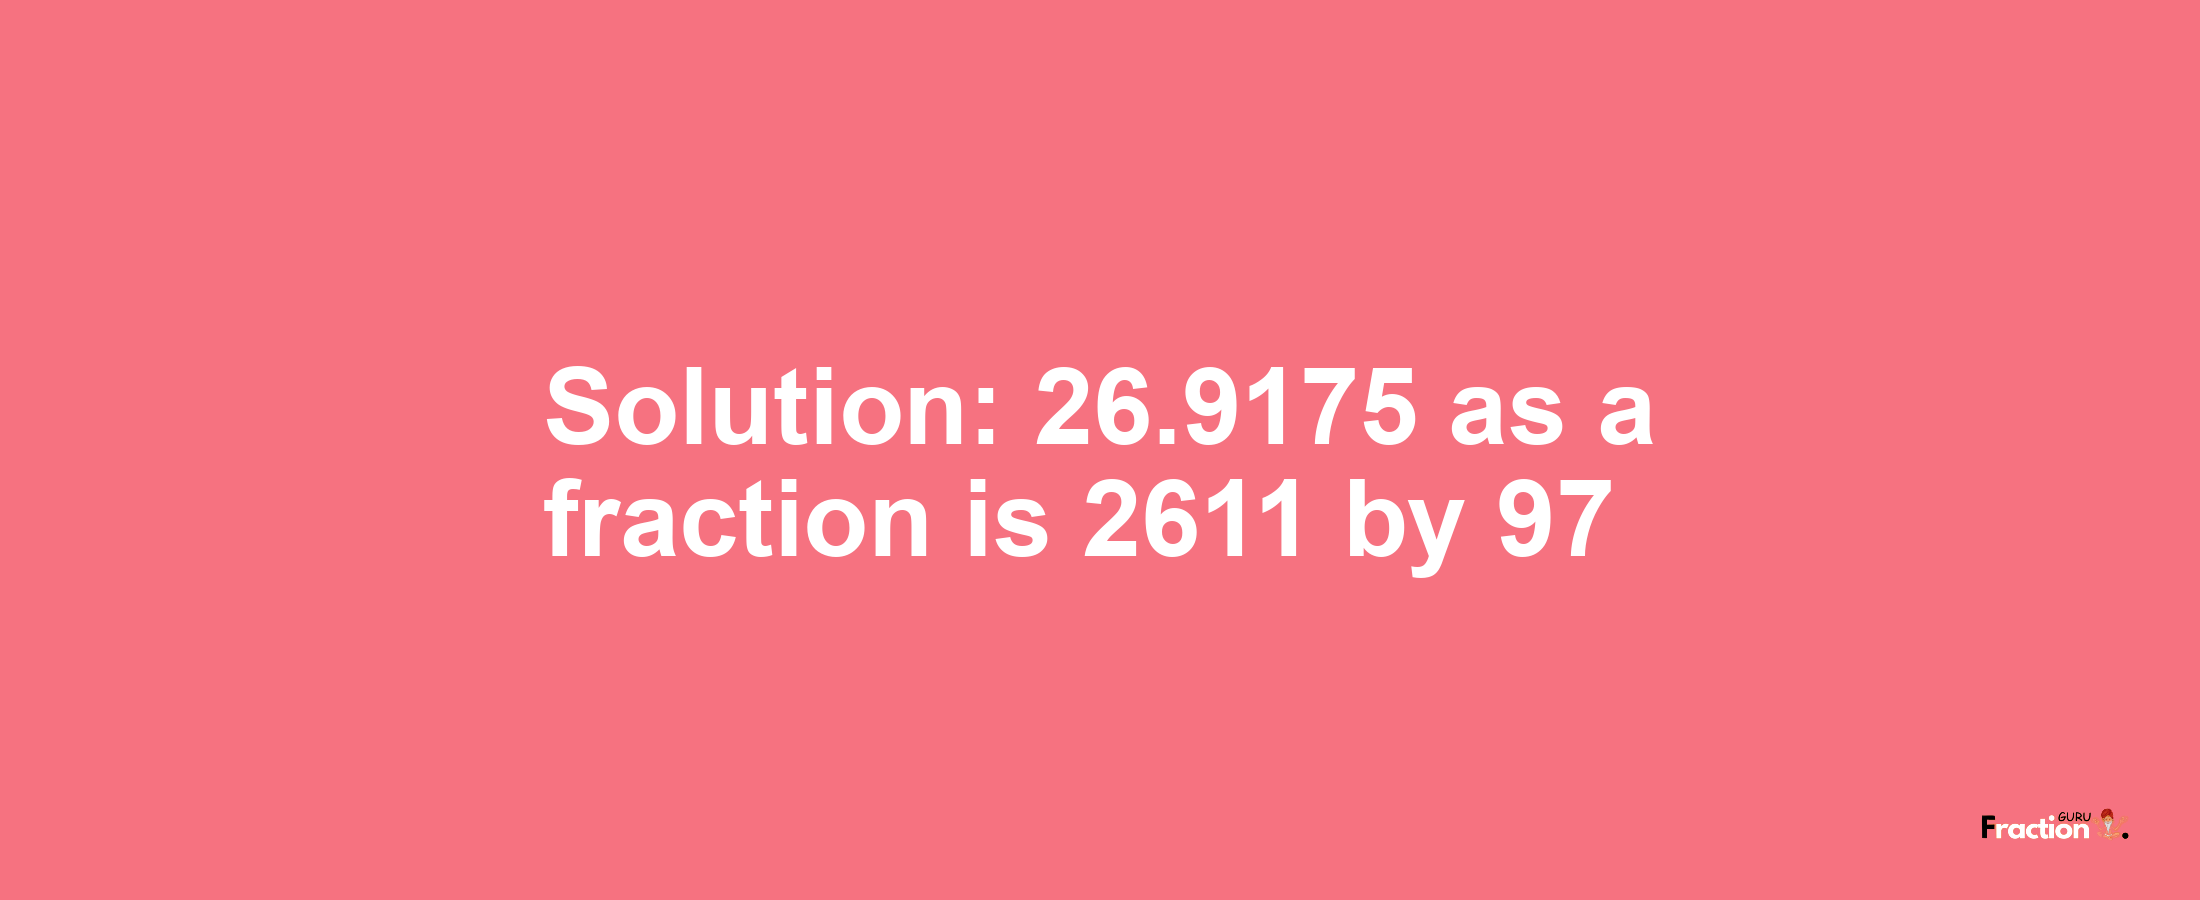 Solution:26.9175 as a fraction is 2611/97